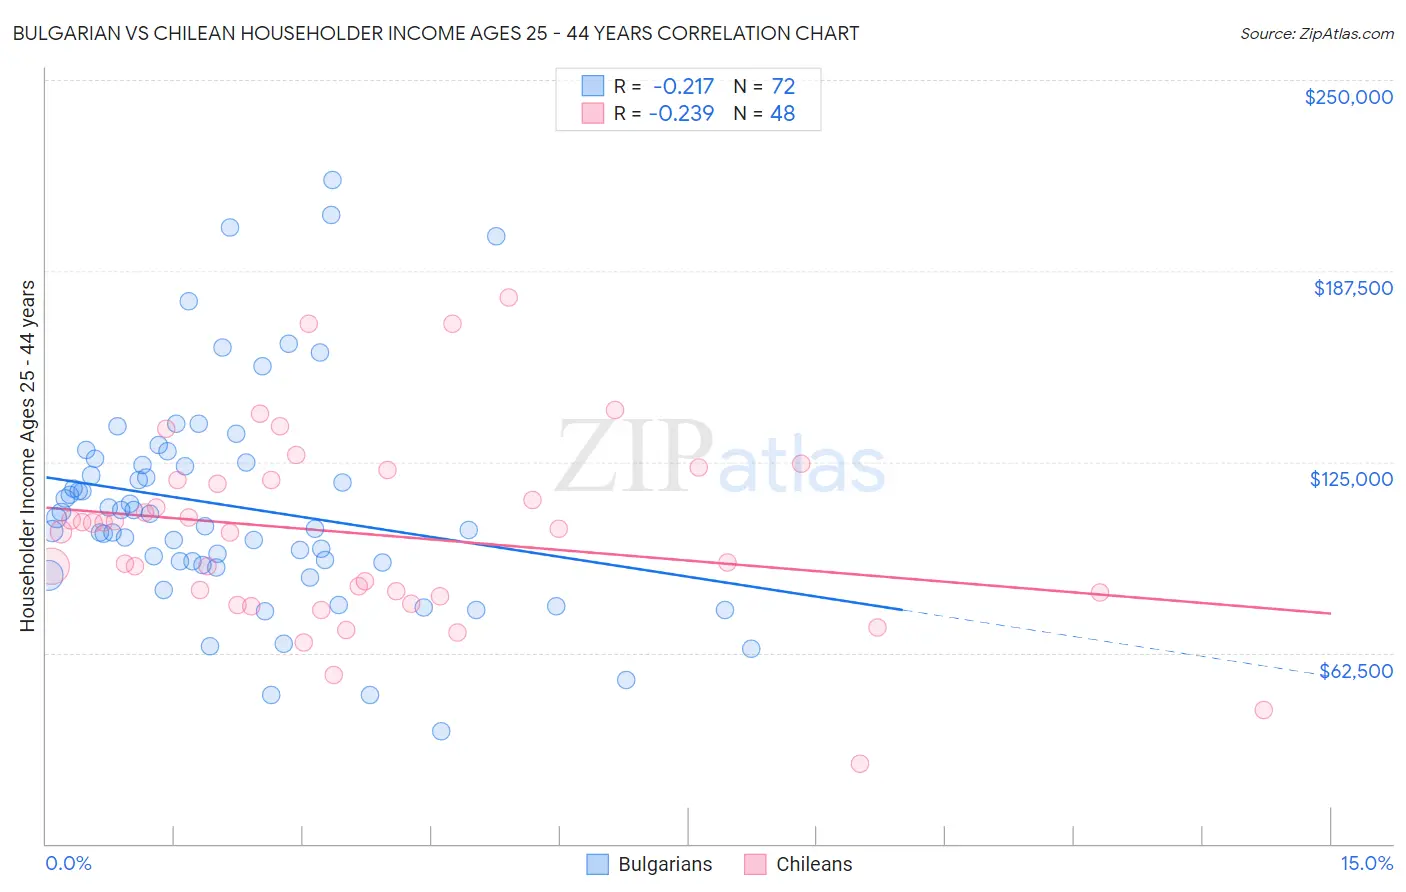 Bulgarian vs Chilean Householder Income Ages 25 - 44 years